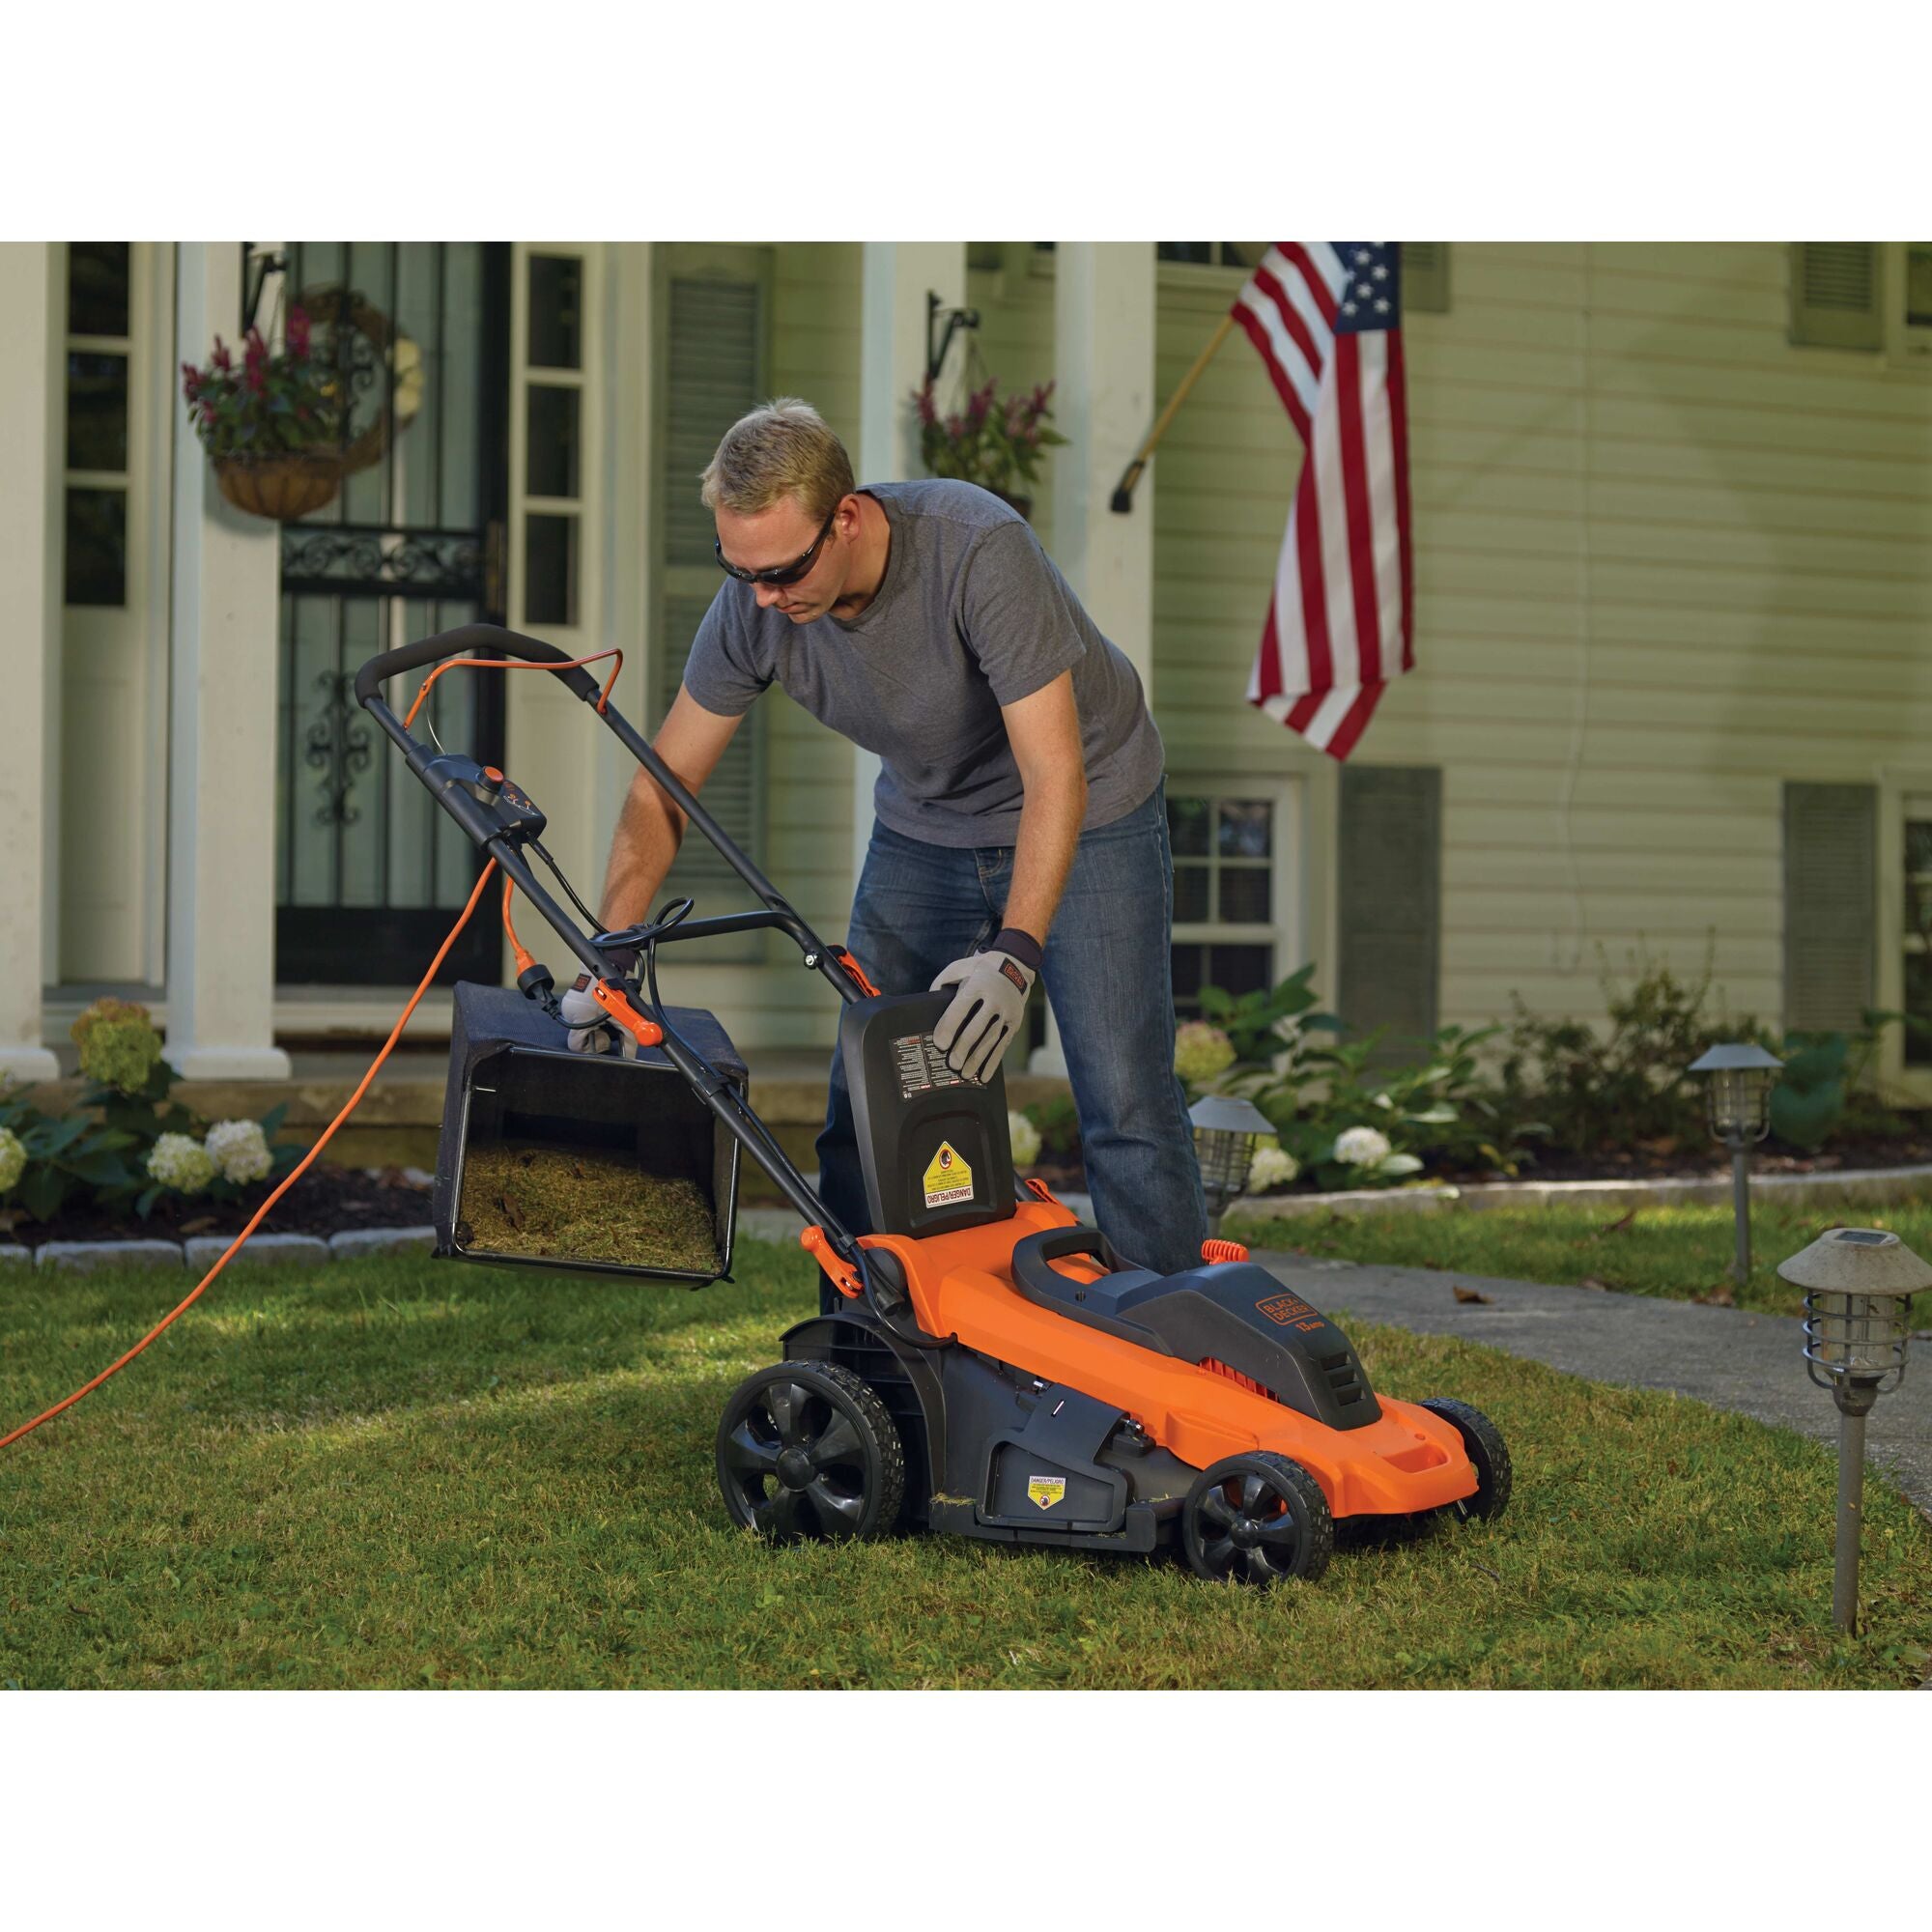 How To Replace a Black and Decker Electric Lawn Mower Blade